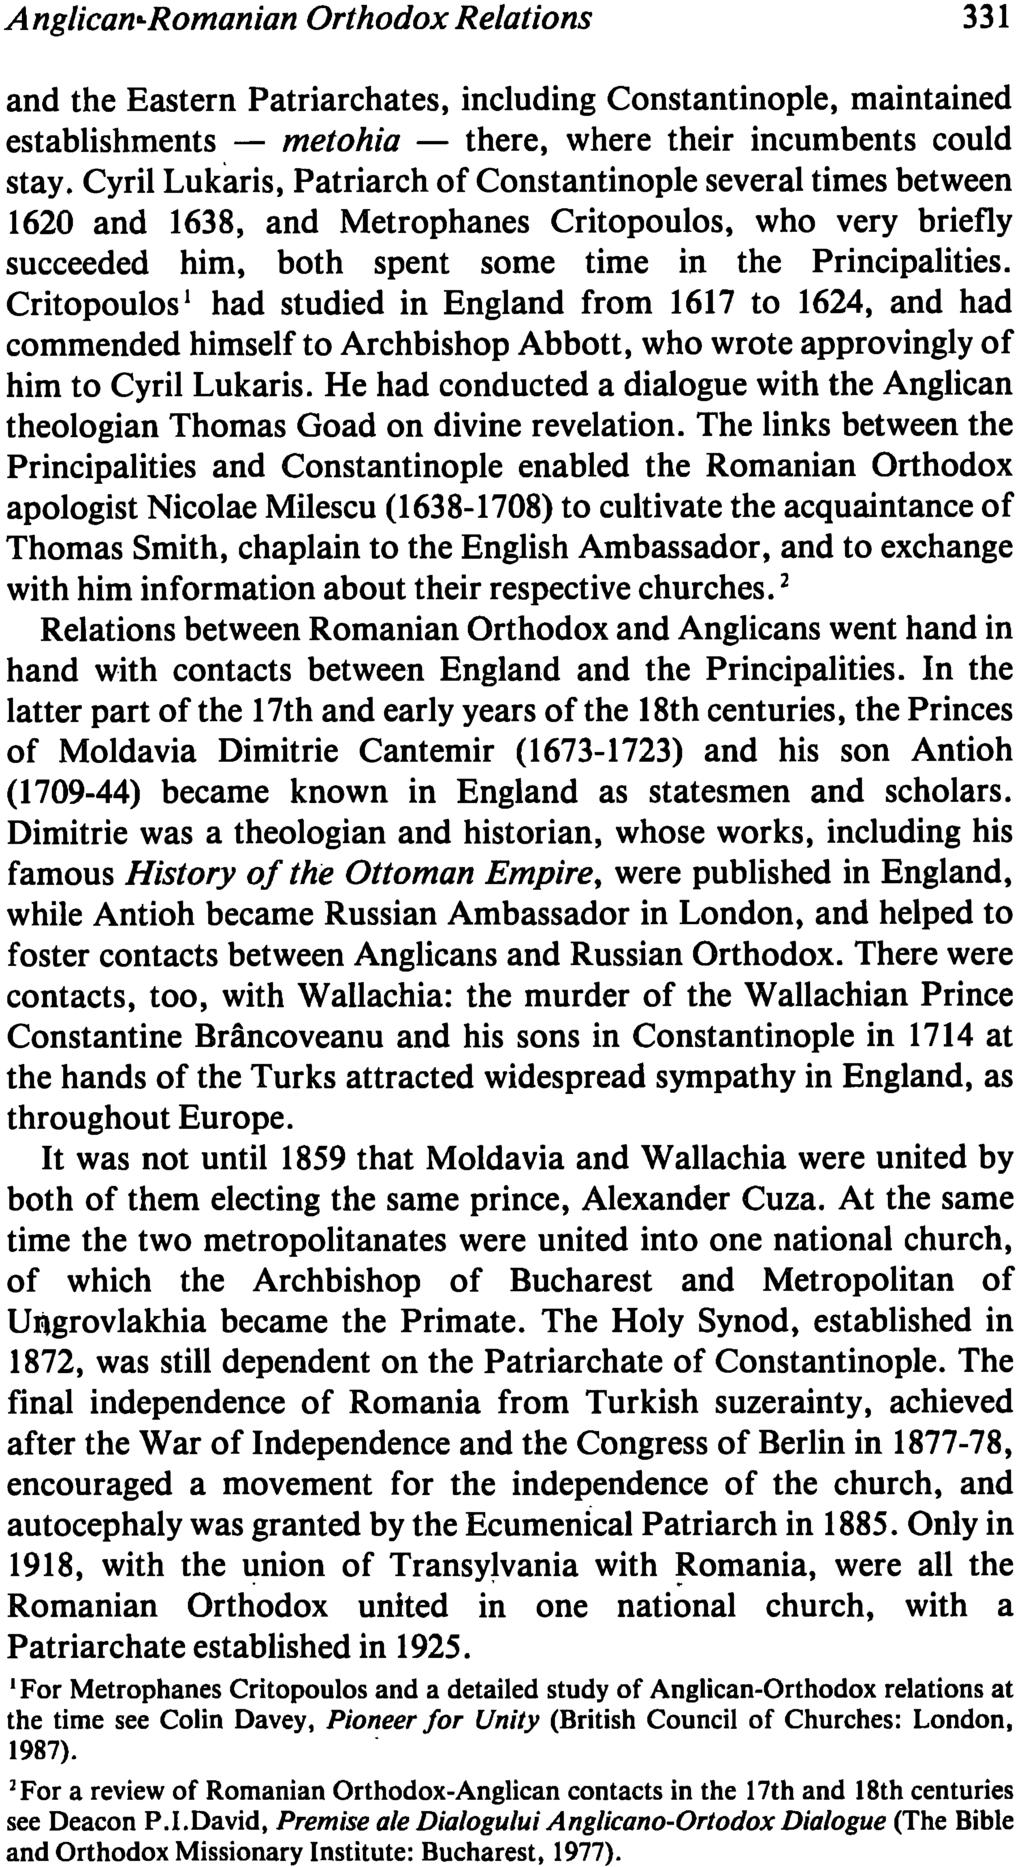 AnglicanLRomanian Orthodox Relations 331 and the Eastern Patriarchates, including Constantinople, maintained establishments - metohia - there, where their incumbents could stay.